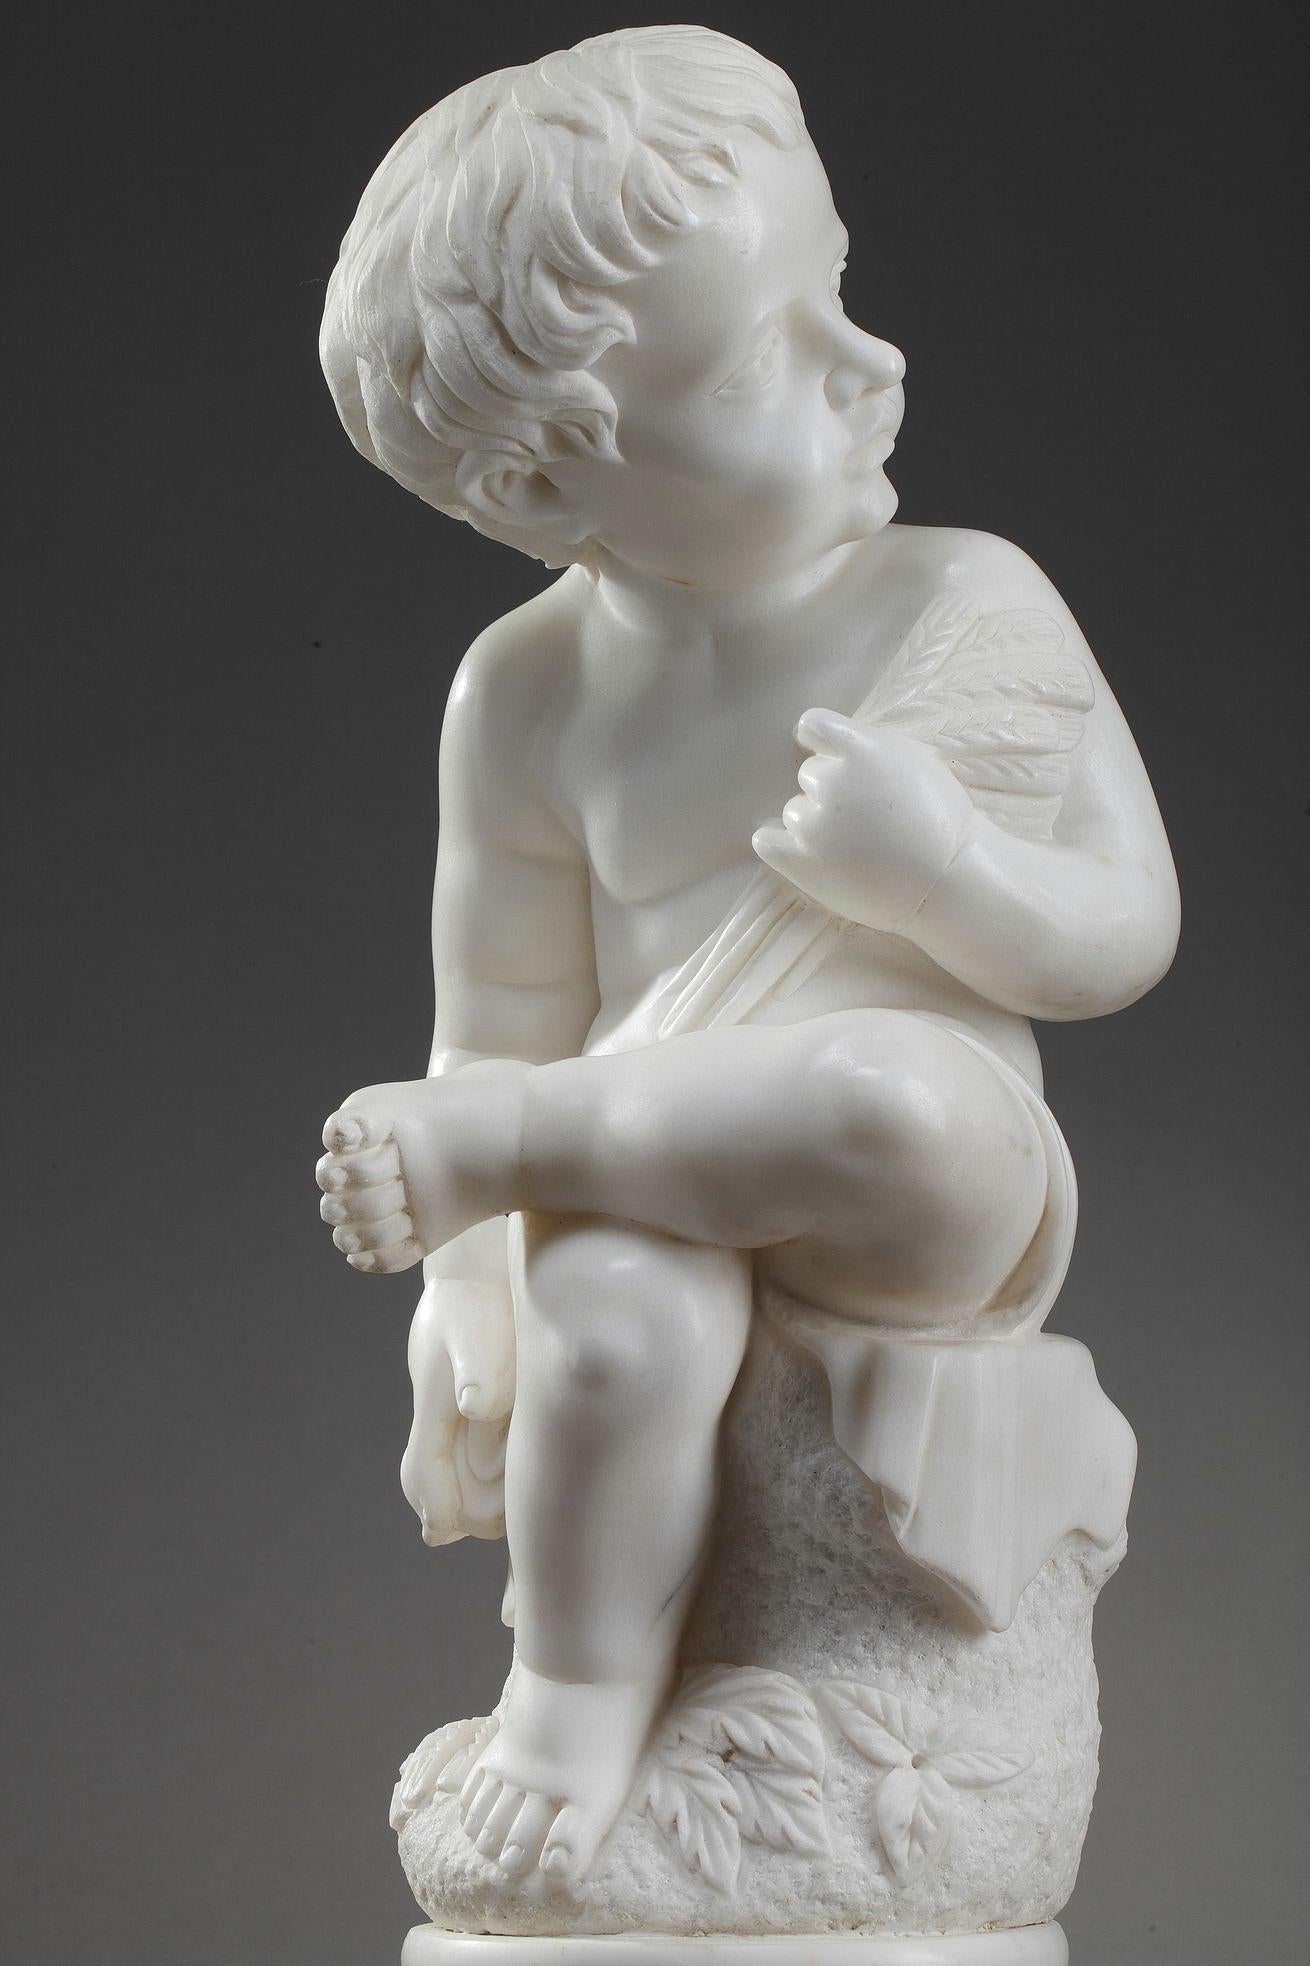 Large marble figure depicting a young boy sitting on a rock, holding some springs of wheat. Carved in white luminous marble in the late 20th century, this figure is a work of exquisite charm. It evokes the innocence of childhood. The marble statue